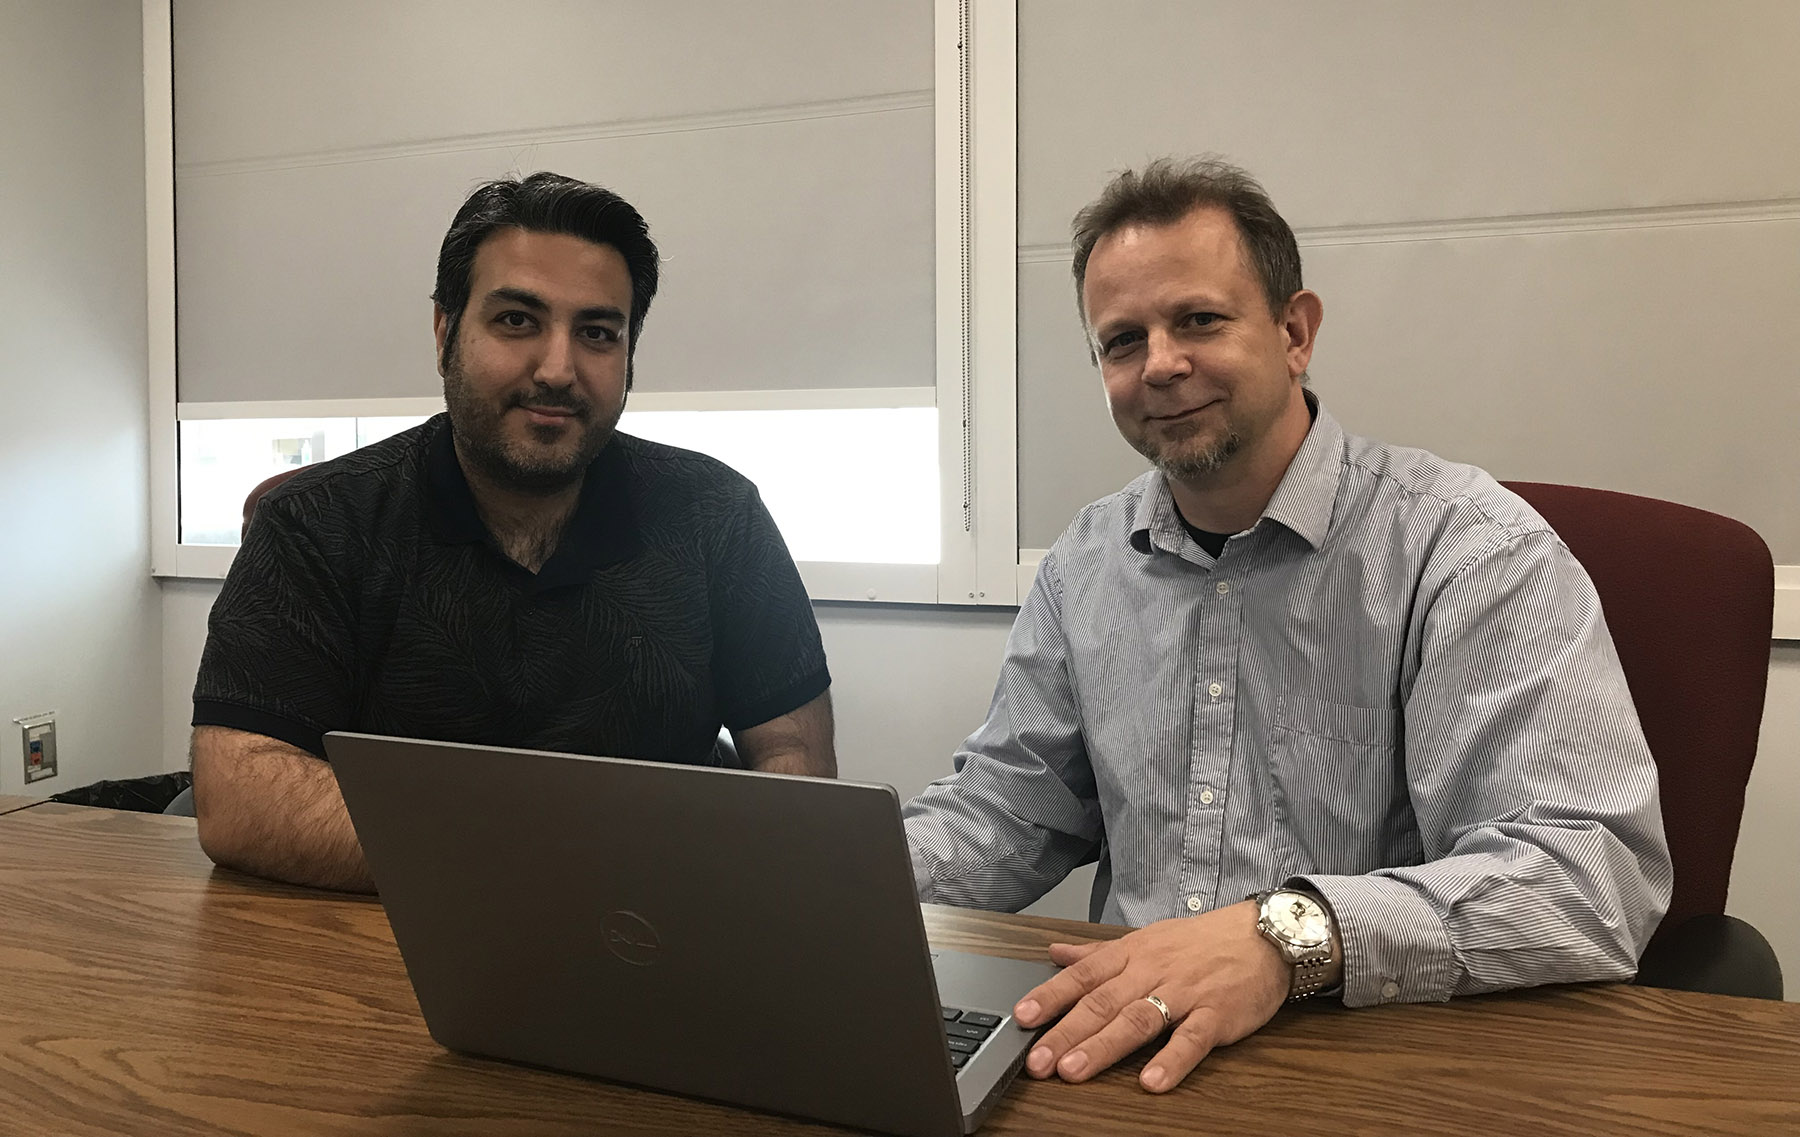 Hamid Reza Sodagari, left, and Csaba Varga are working on tracking the rise of antimicrobial resistance in bacteria that are commonly associated with livestock.